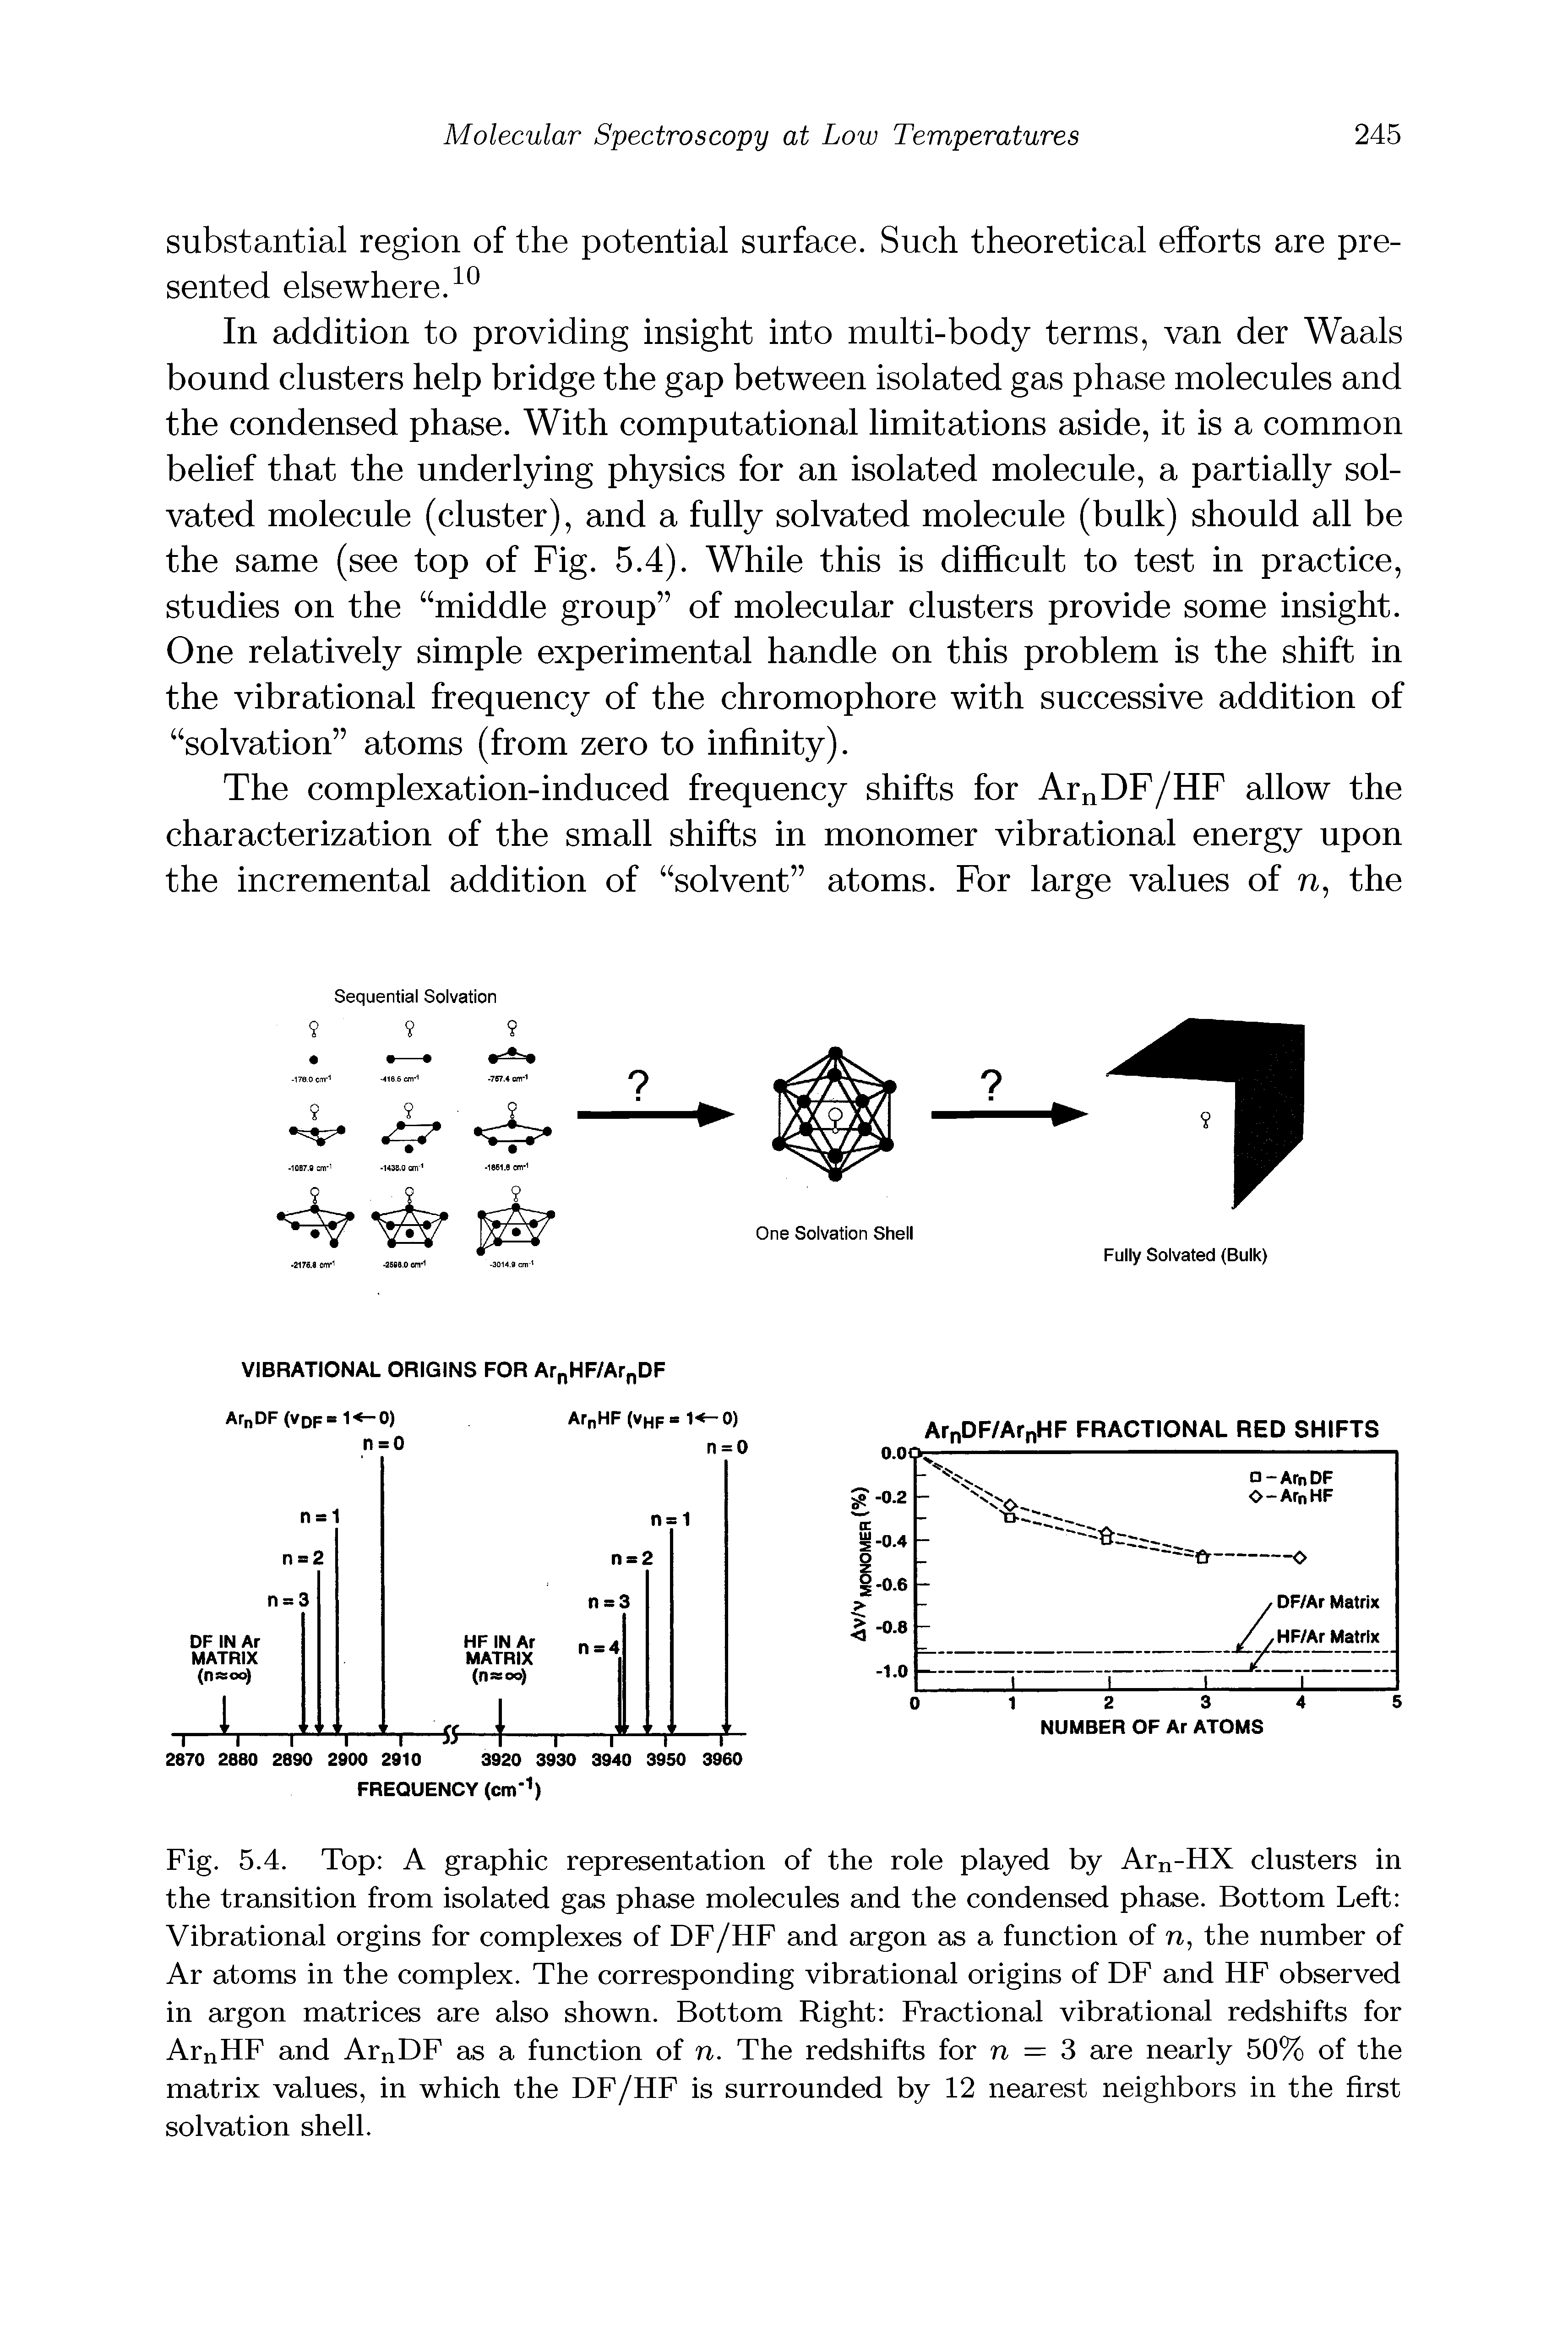 Fig. 5.4. Top A graphic representation of the role played by Arn-HX clusters in the transition from isolated gas phase molecules and the condensed phase. Bottom Left Vibrational orgins for complexes of DF/HF and argon as a function of n, the number of Ar atoms in the complex. The corresponding vibrational origins of DF and HF observed in argon matrices are also shown. Bottom Right Fractional vibrational redshifts for ArnHF and ArnDF as a function of n. The redshifts for n = 3 are nearly 50% of the matrix values, in which the DF/HF is surrounded by 12 nearest neighbors in the first solvation shell.